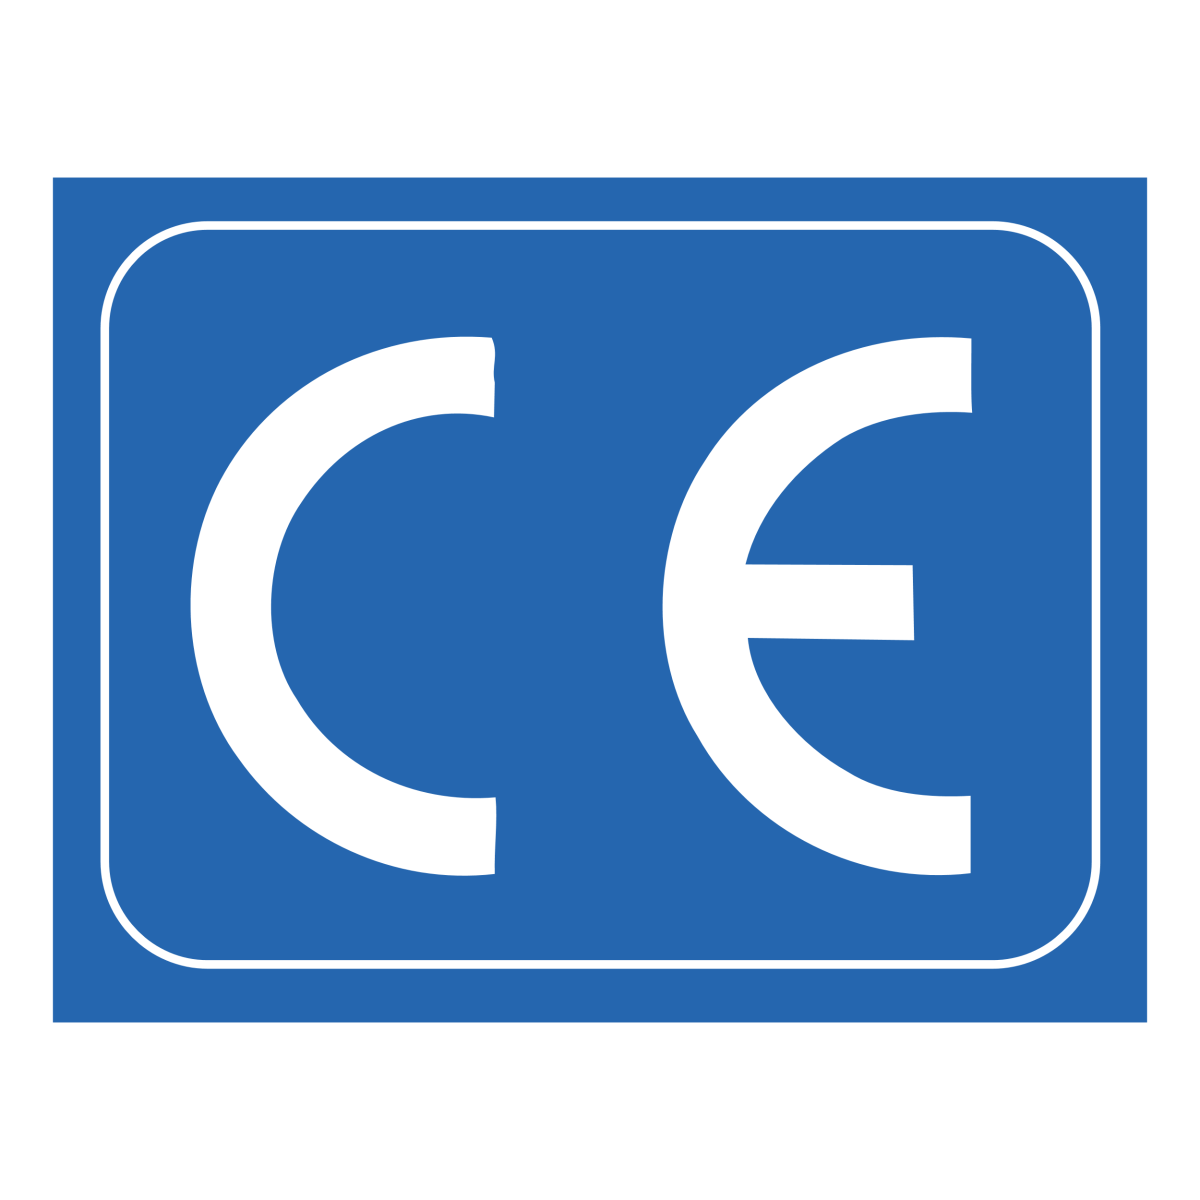 8.Chengwen obtained CE certification,